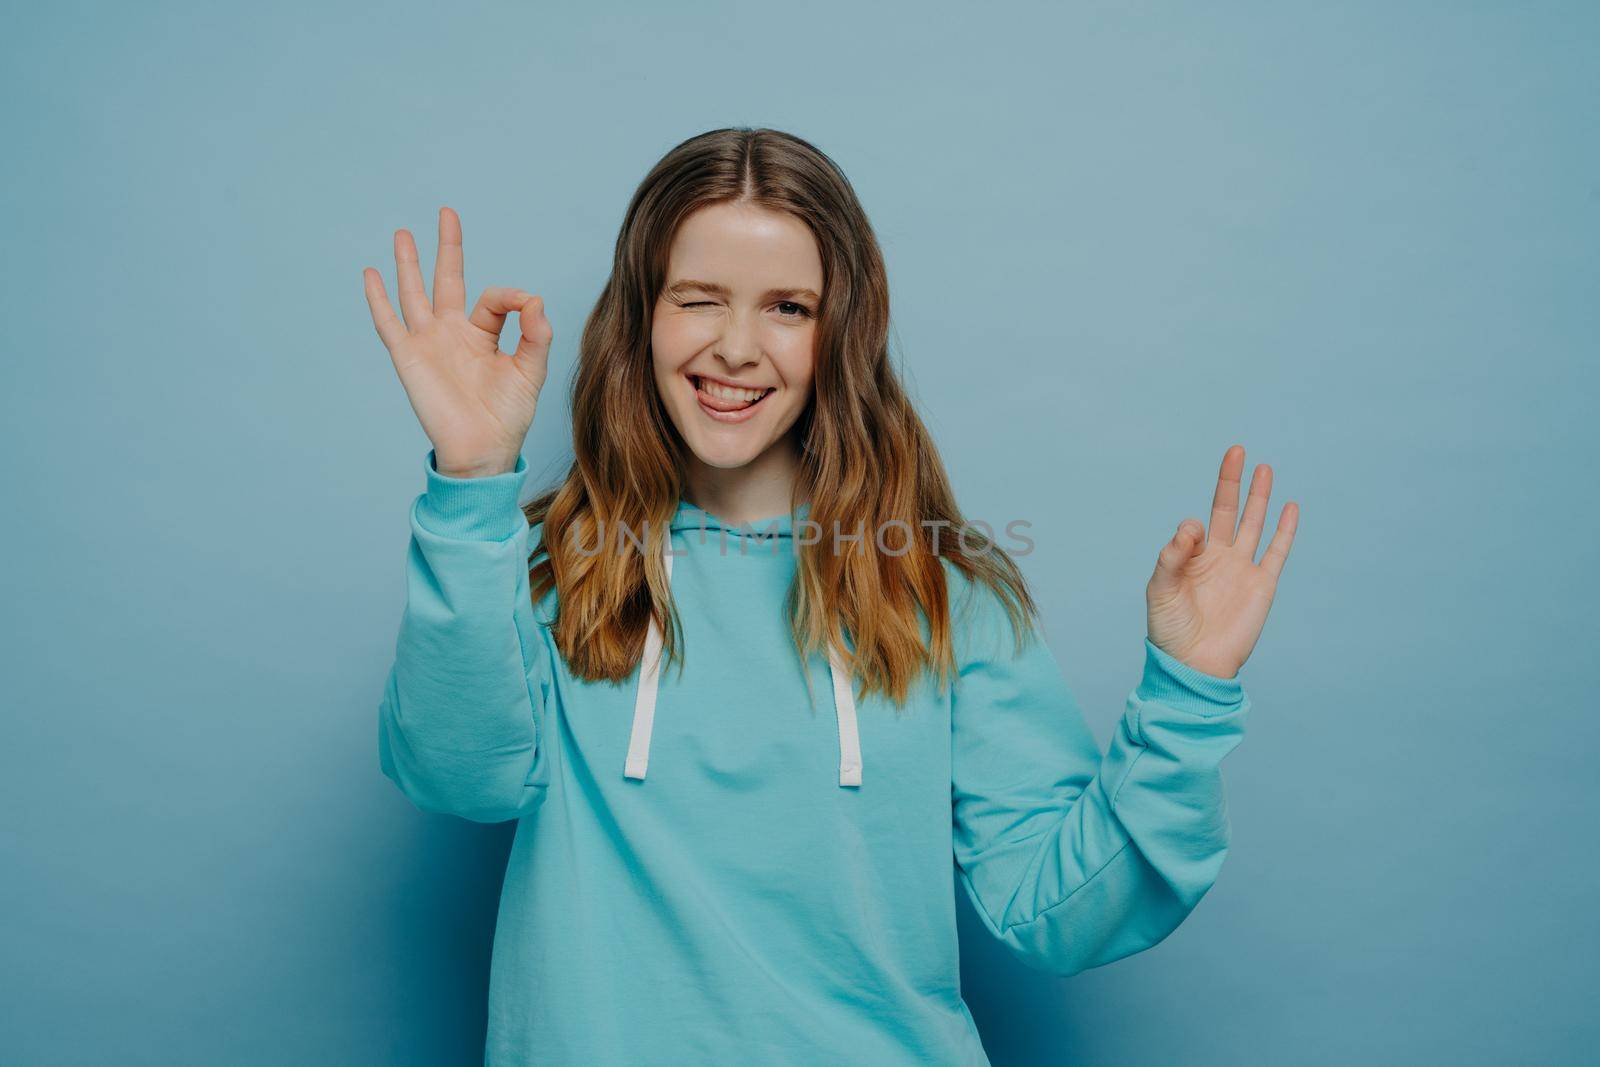 Happy young girl showing okay sign posing over blue blue background by vkstock